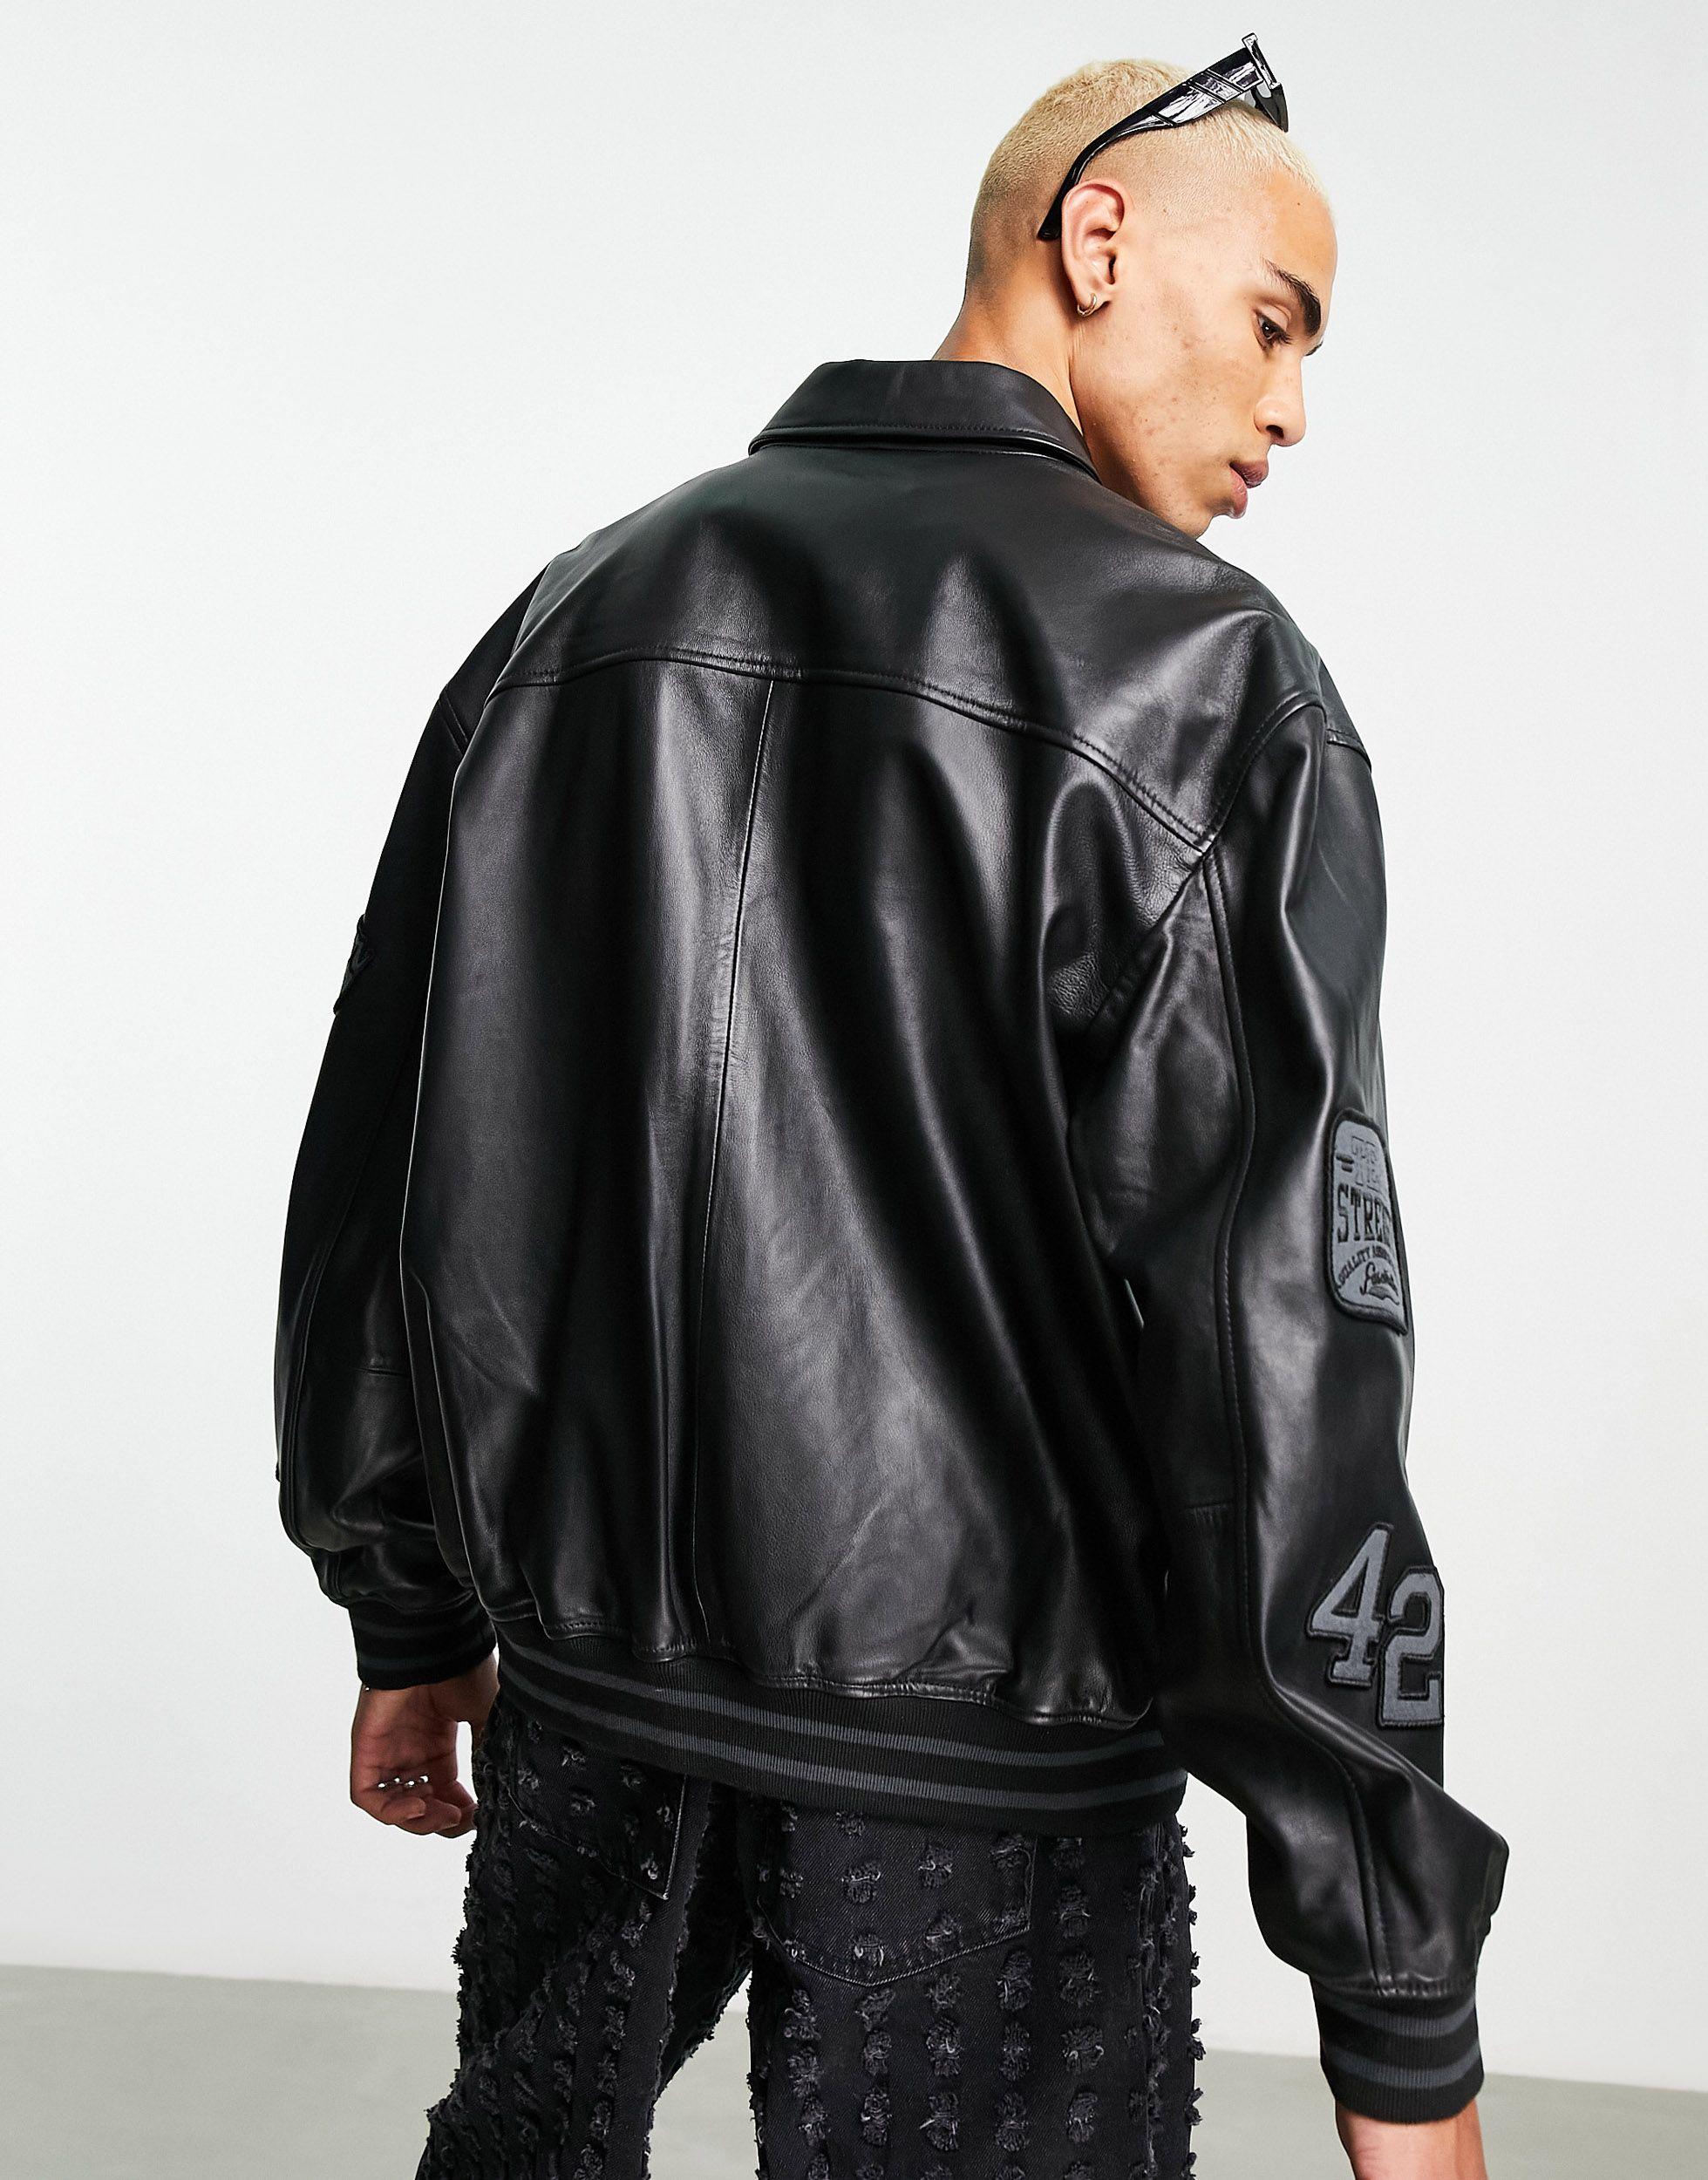 Adpt Oversized Varsity Bomber Jacket with Faux Leather Sleeves in Black